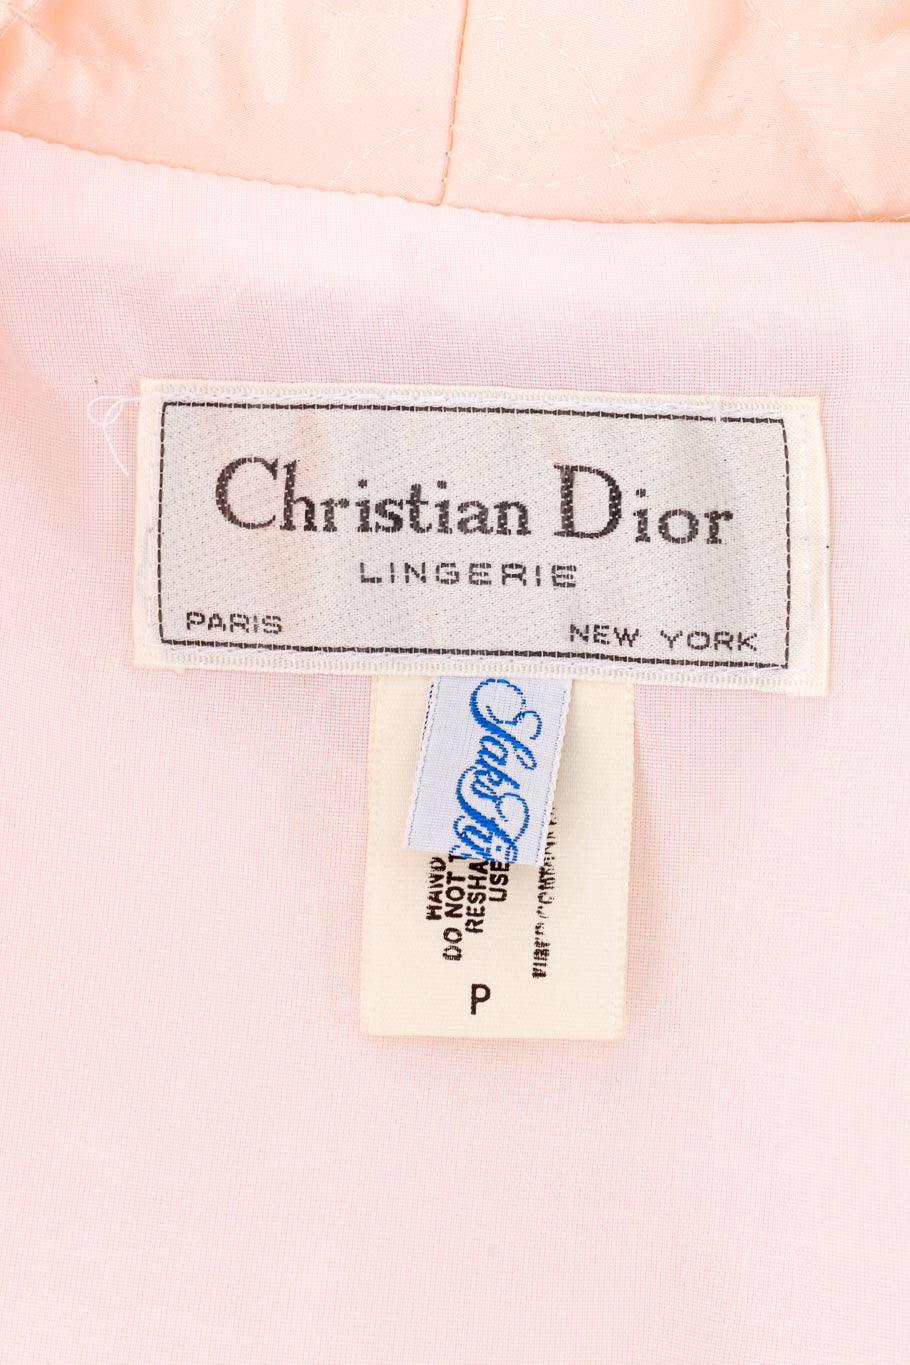 Christian Dior Quilted Satin Robe label @RECESS LA